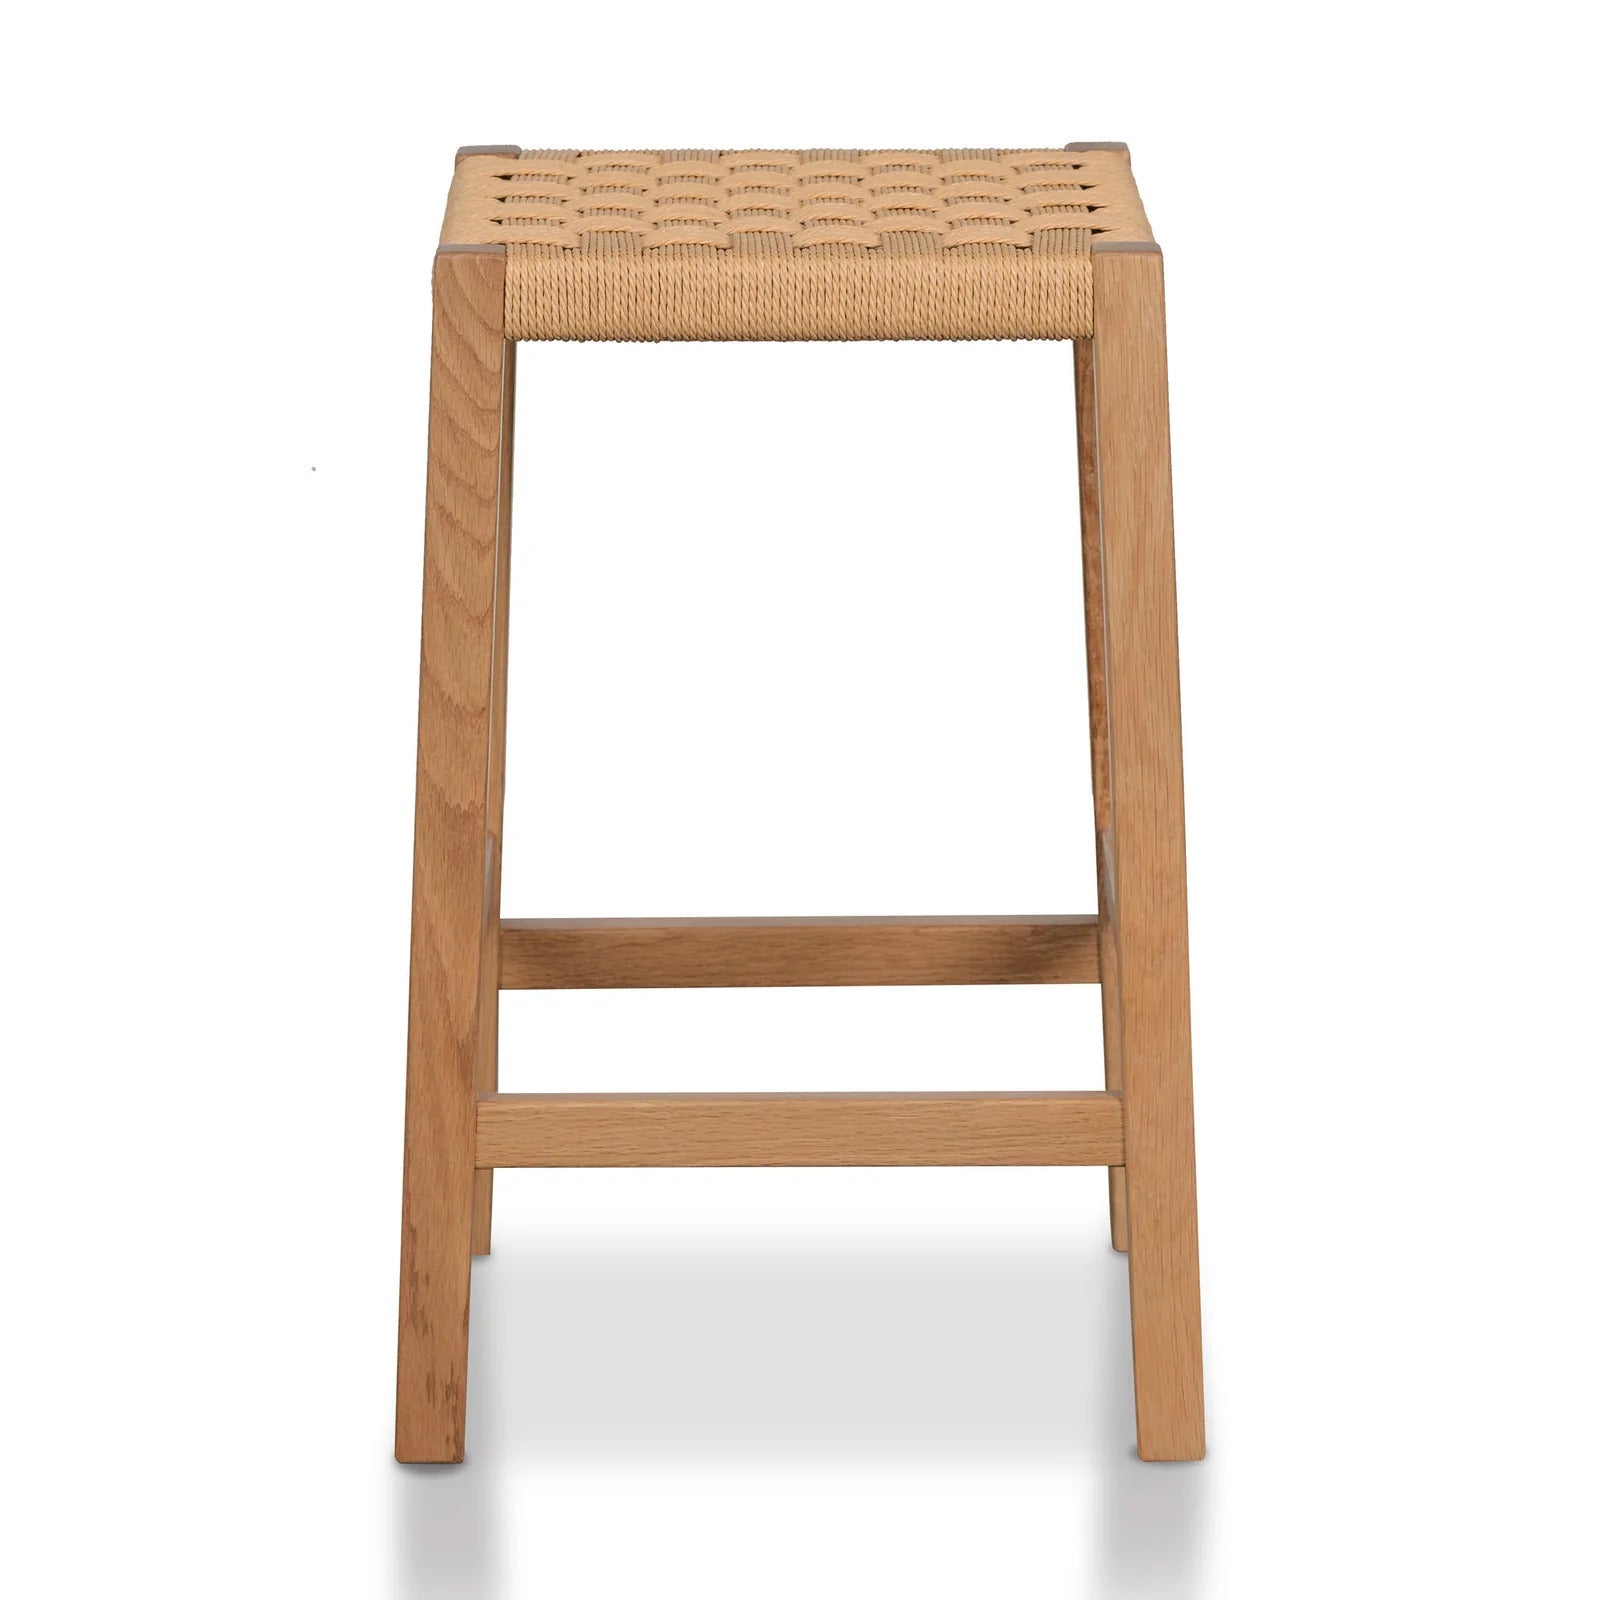 Full profile view of Esther Natural Oak Barstool with handwoven paper cord seat